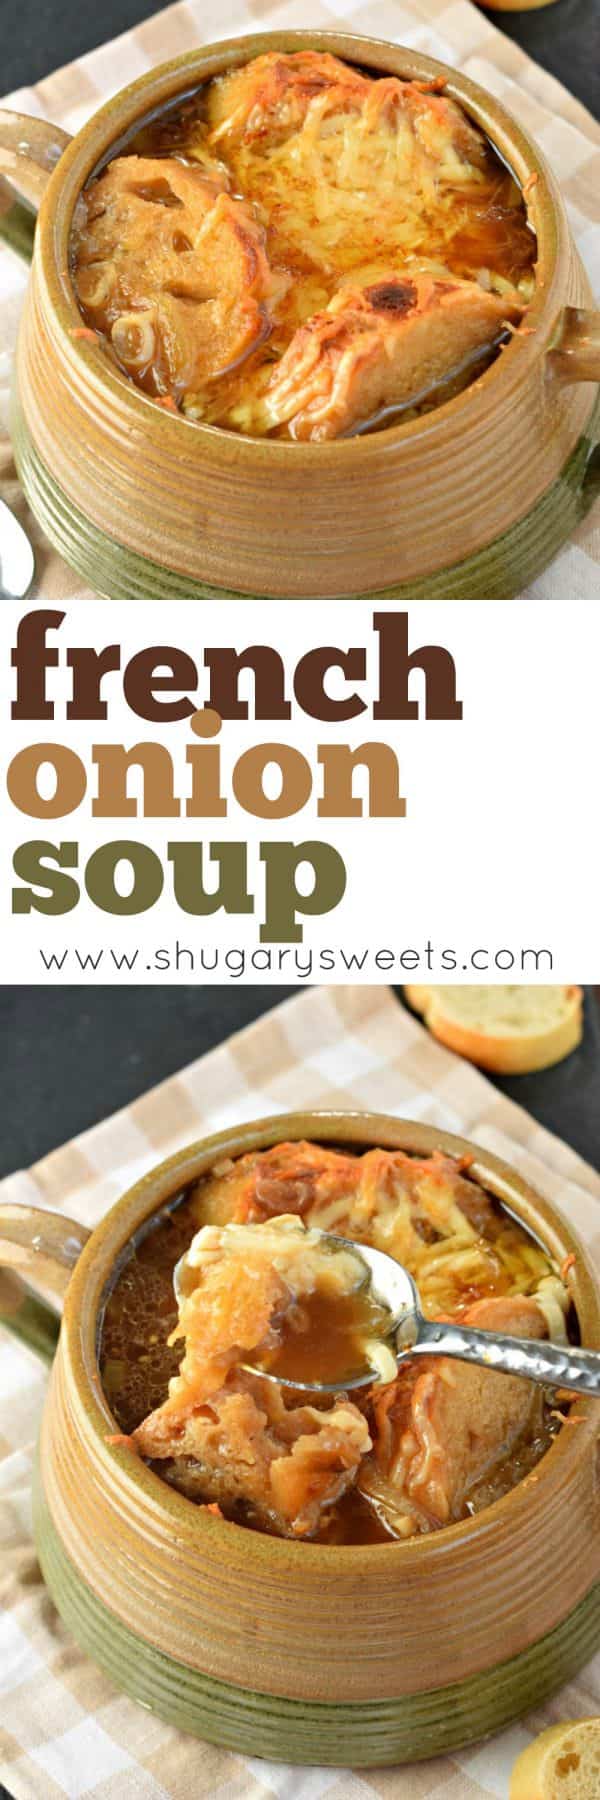 Sweet caramelized onions, rich beef broth and toasty cheese combined together to make the best French Onion Soup recipe ever!